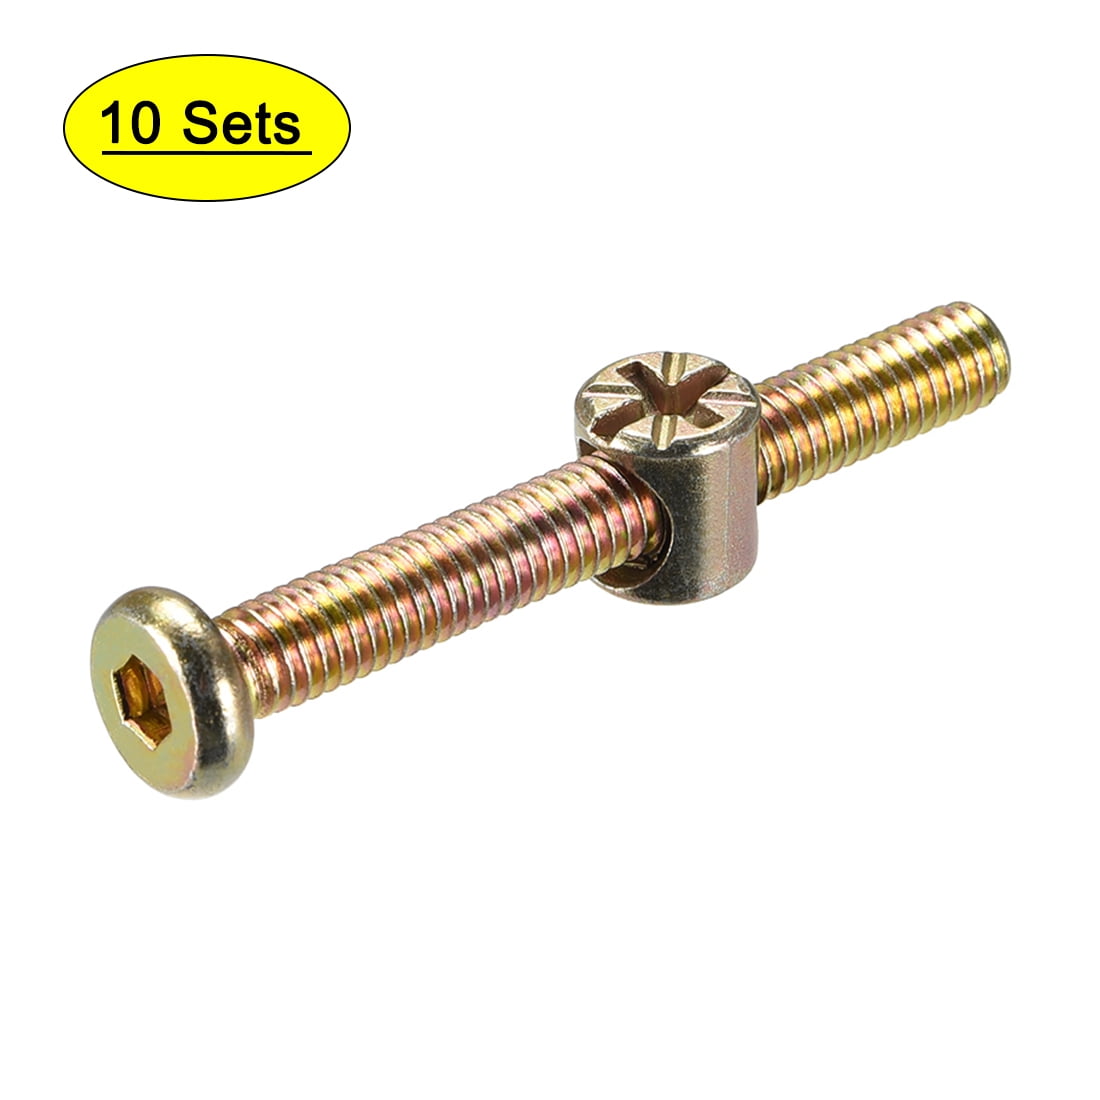 M6 X 50mm Zinc Plated Hex Drive Socket Cap Furniture Bolts With Barrel Nuts For 